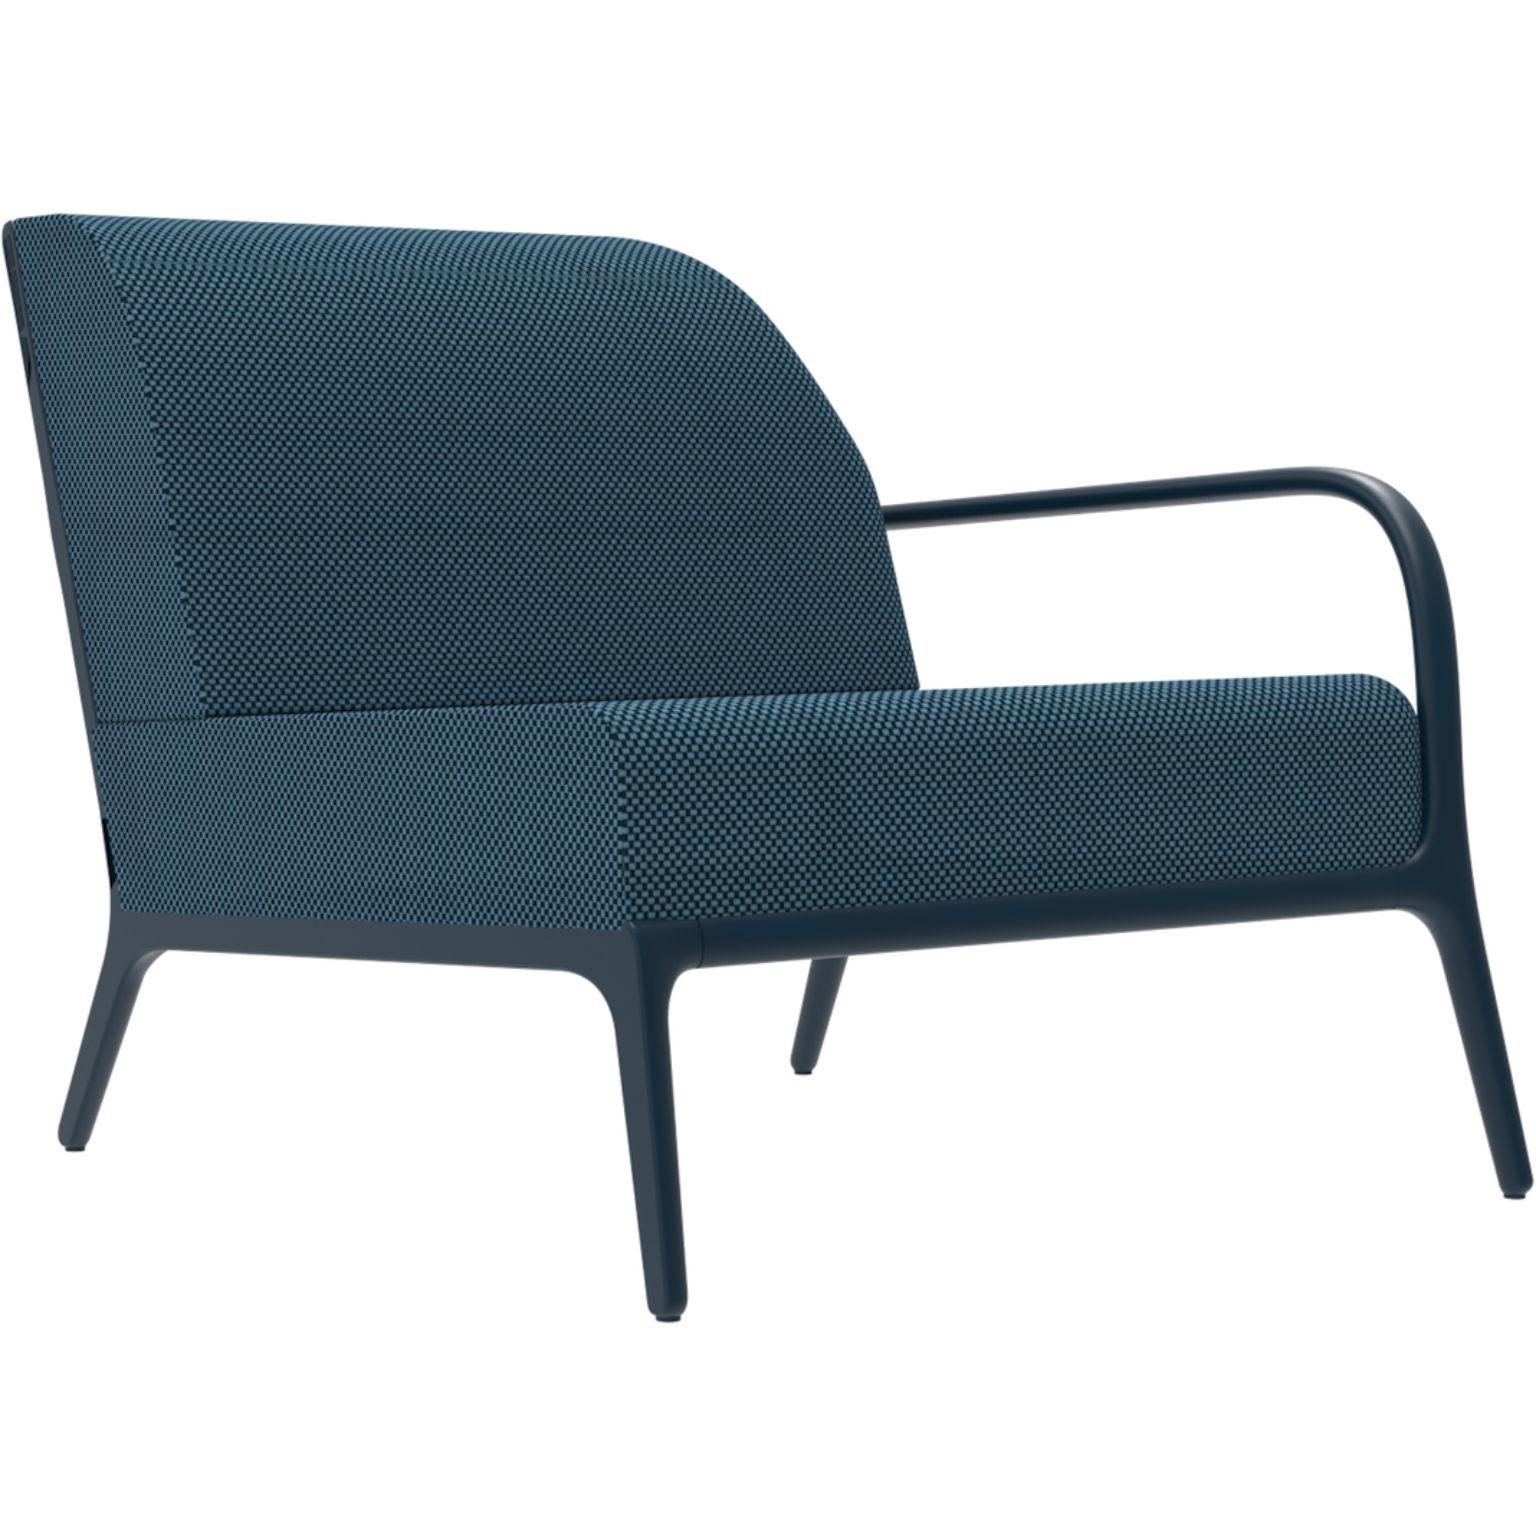 Xaloc left 90 navy modular sofa by MOWEE
Dimensions: D100 x W90 x H81 cm (Seat Height 42 cm)
Material: Aluminium, Textile
Weight: 25 kg
Also Available in different colours and finishes. 

 Xaloc synthesizes the lines of interior furniture to